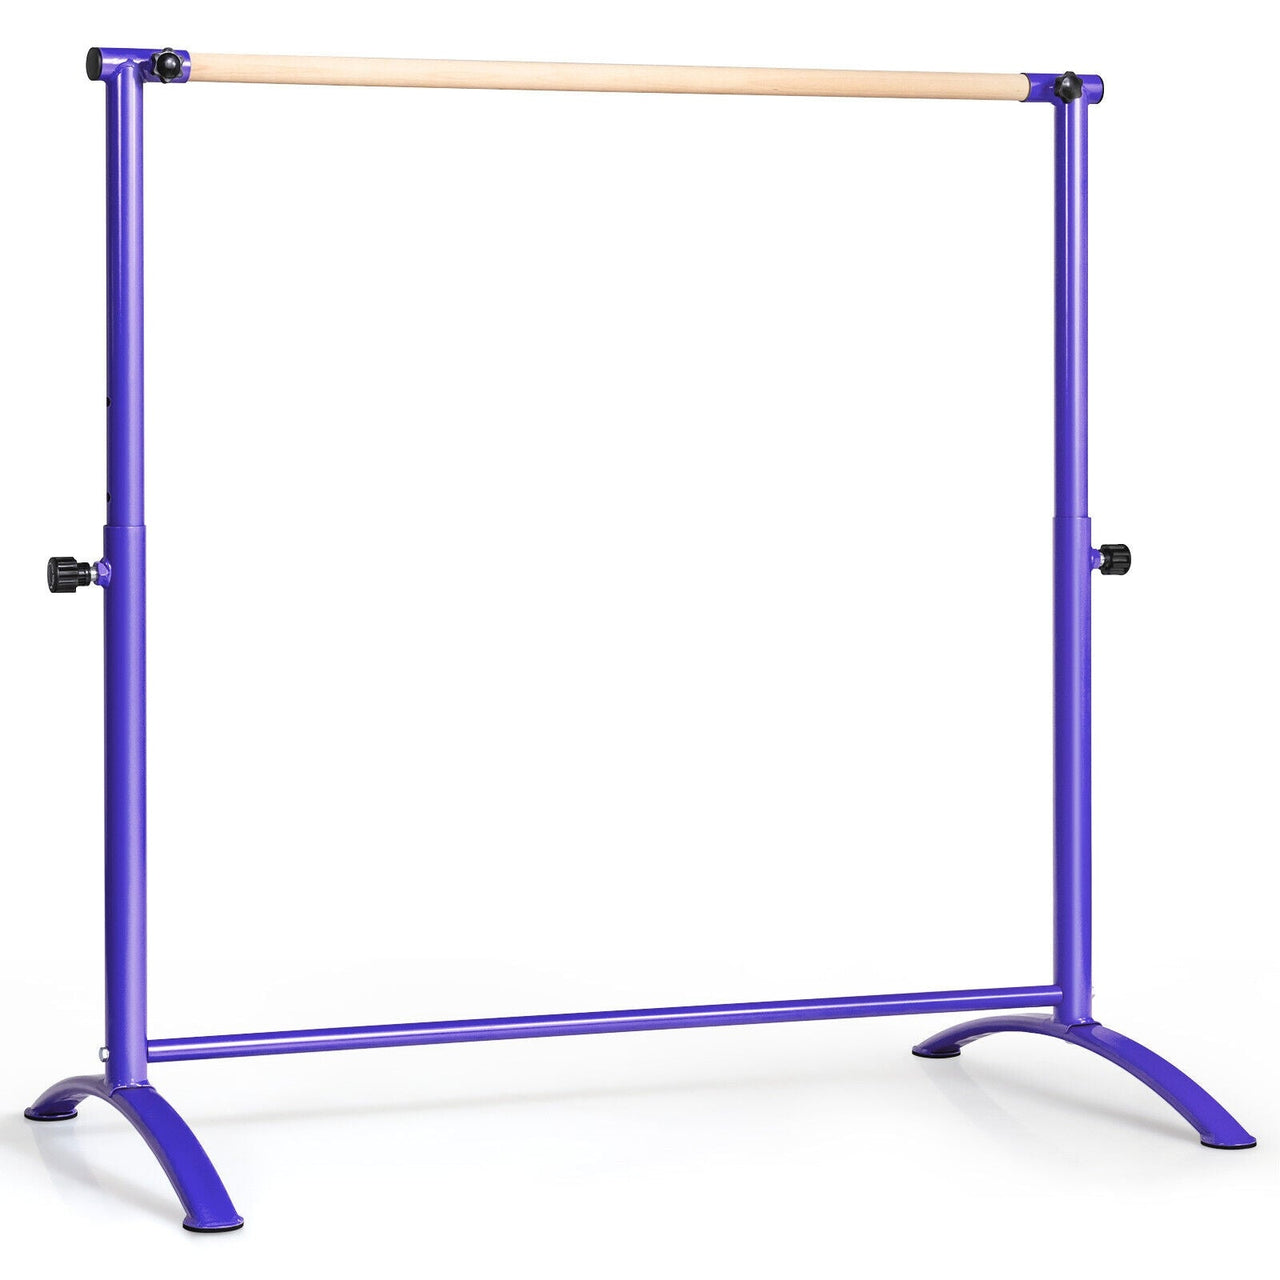 51 Inch Ballet Barre Bar with 4-Position Adjustable Height